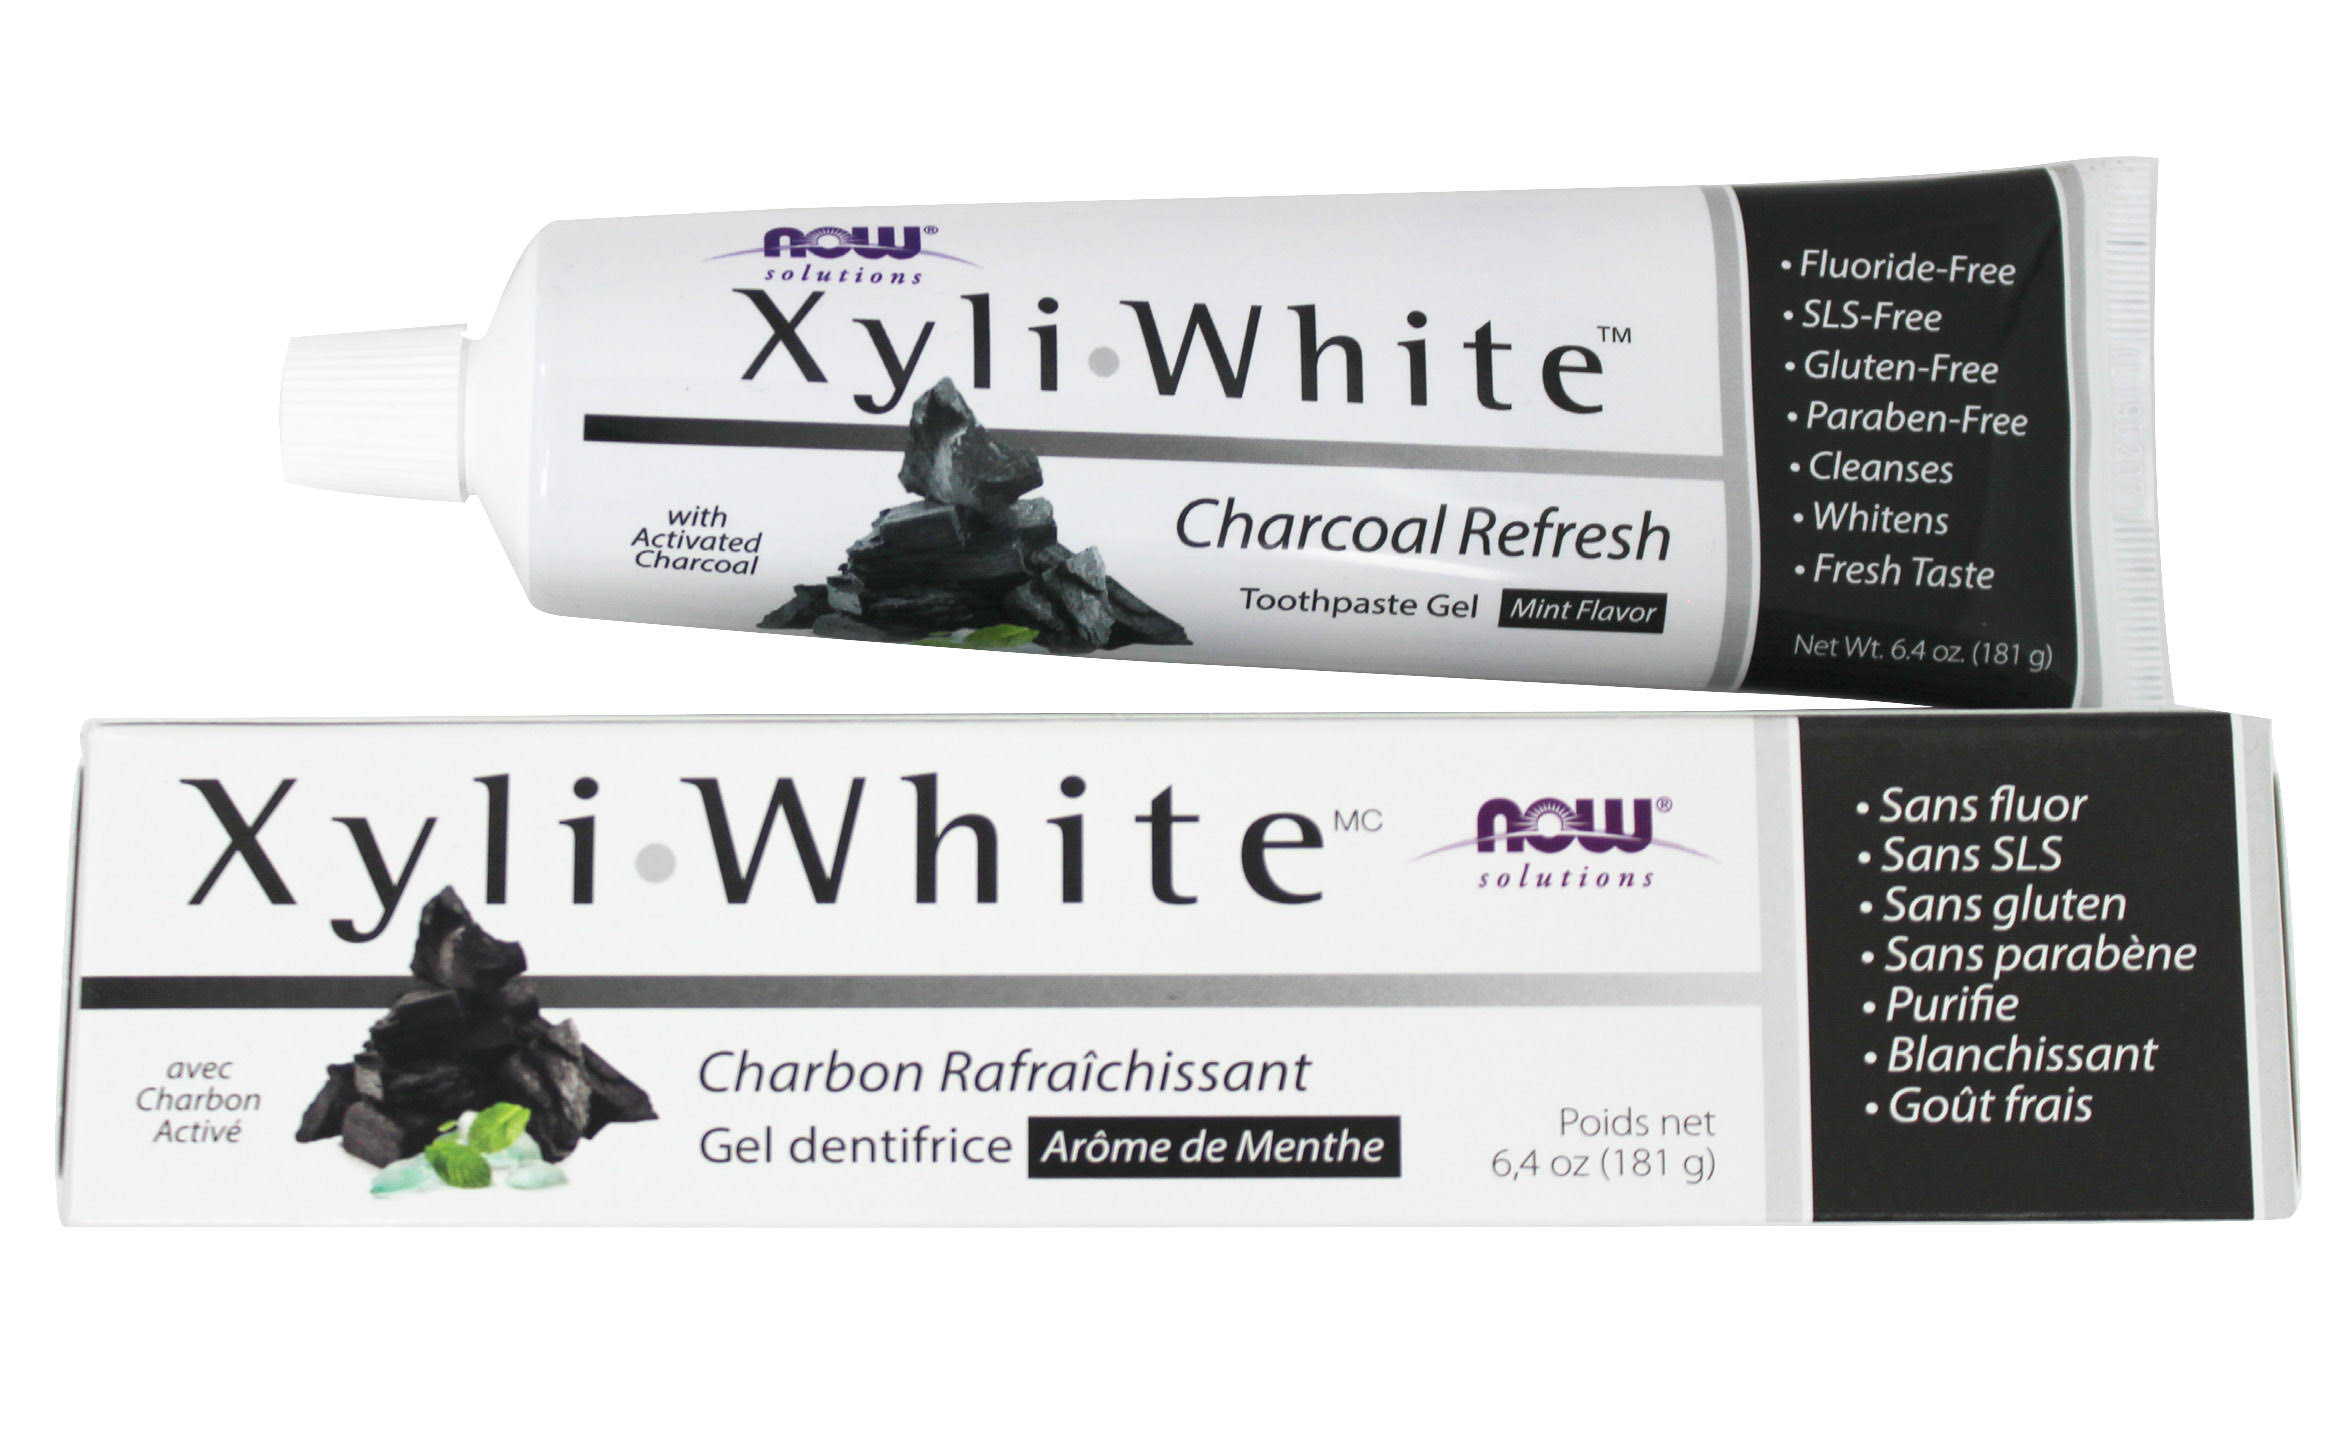 NOW Foods - XyliWhite, Charcoal Refresh Toothpaste Gel - 181g